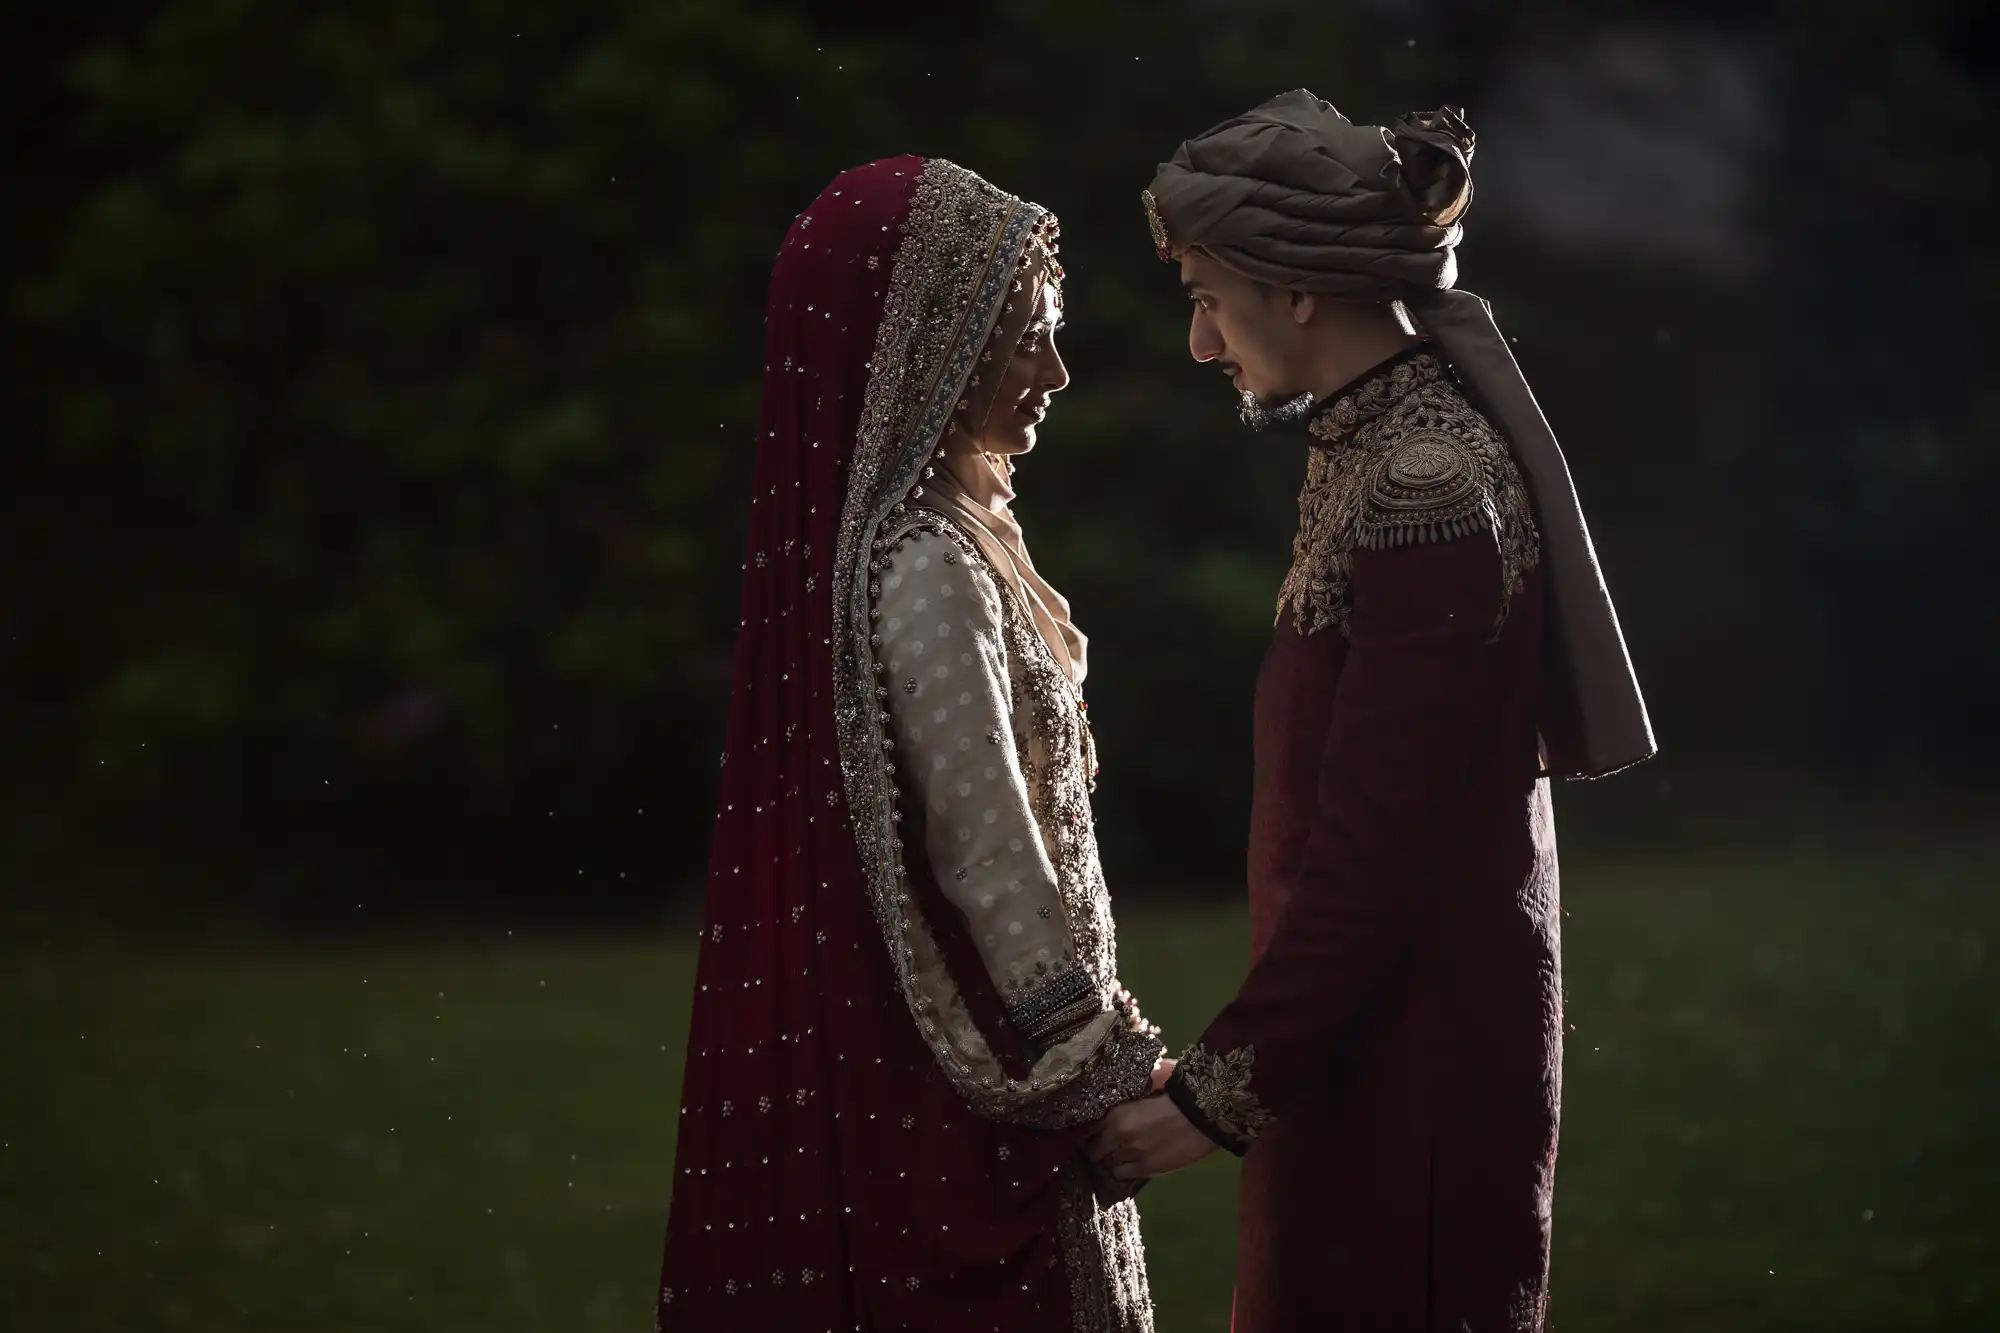 A couple in traditional attire gazes at each other, holding hands in an outdoor setting with a dark, blurred background. The woman wears a red and gold outfit with a veil, and the man wears a matching outfit.